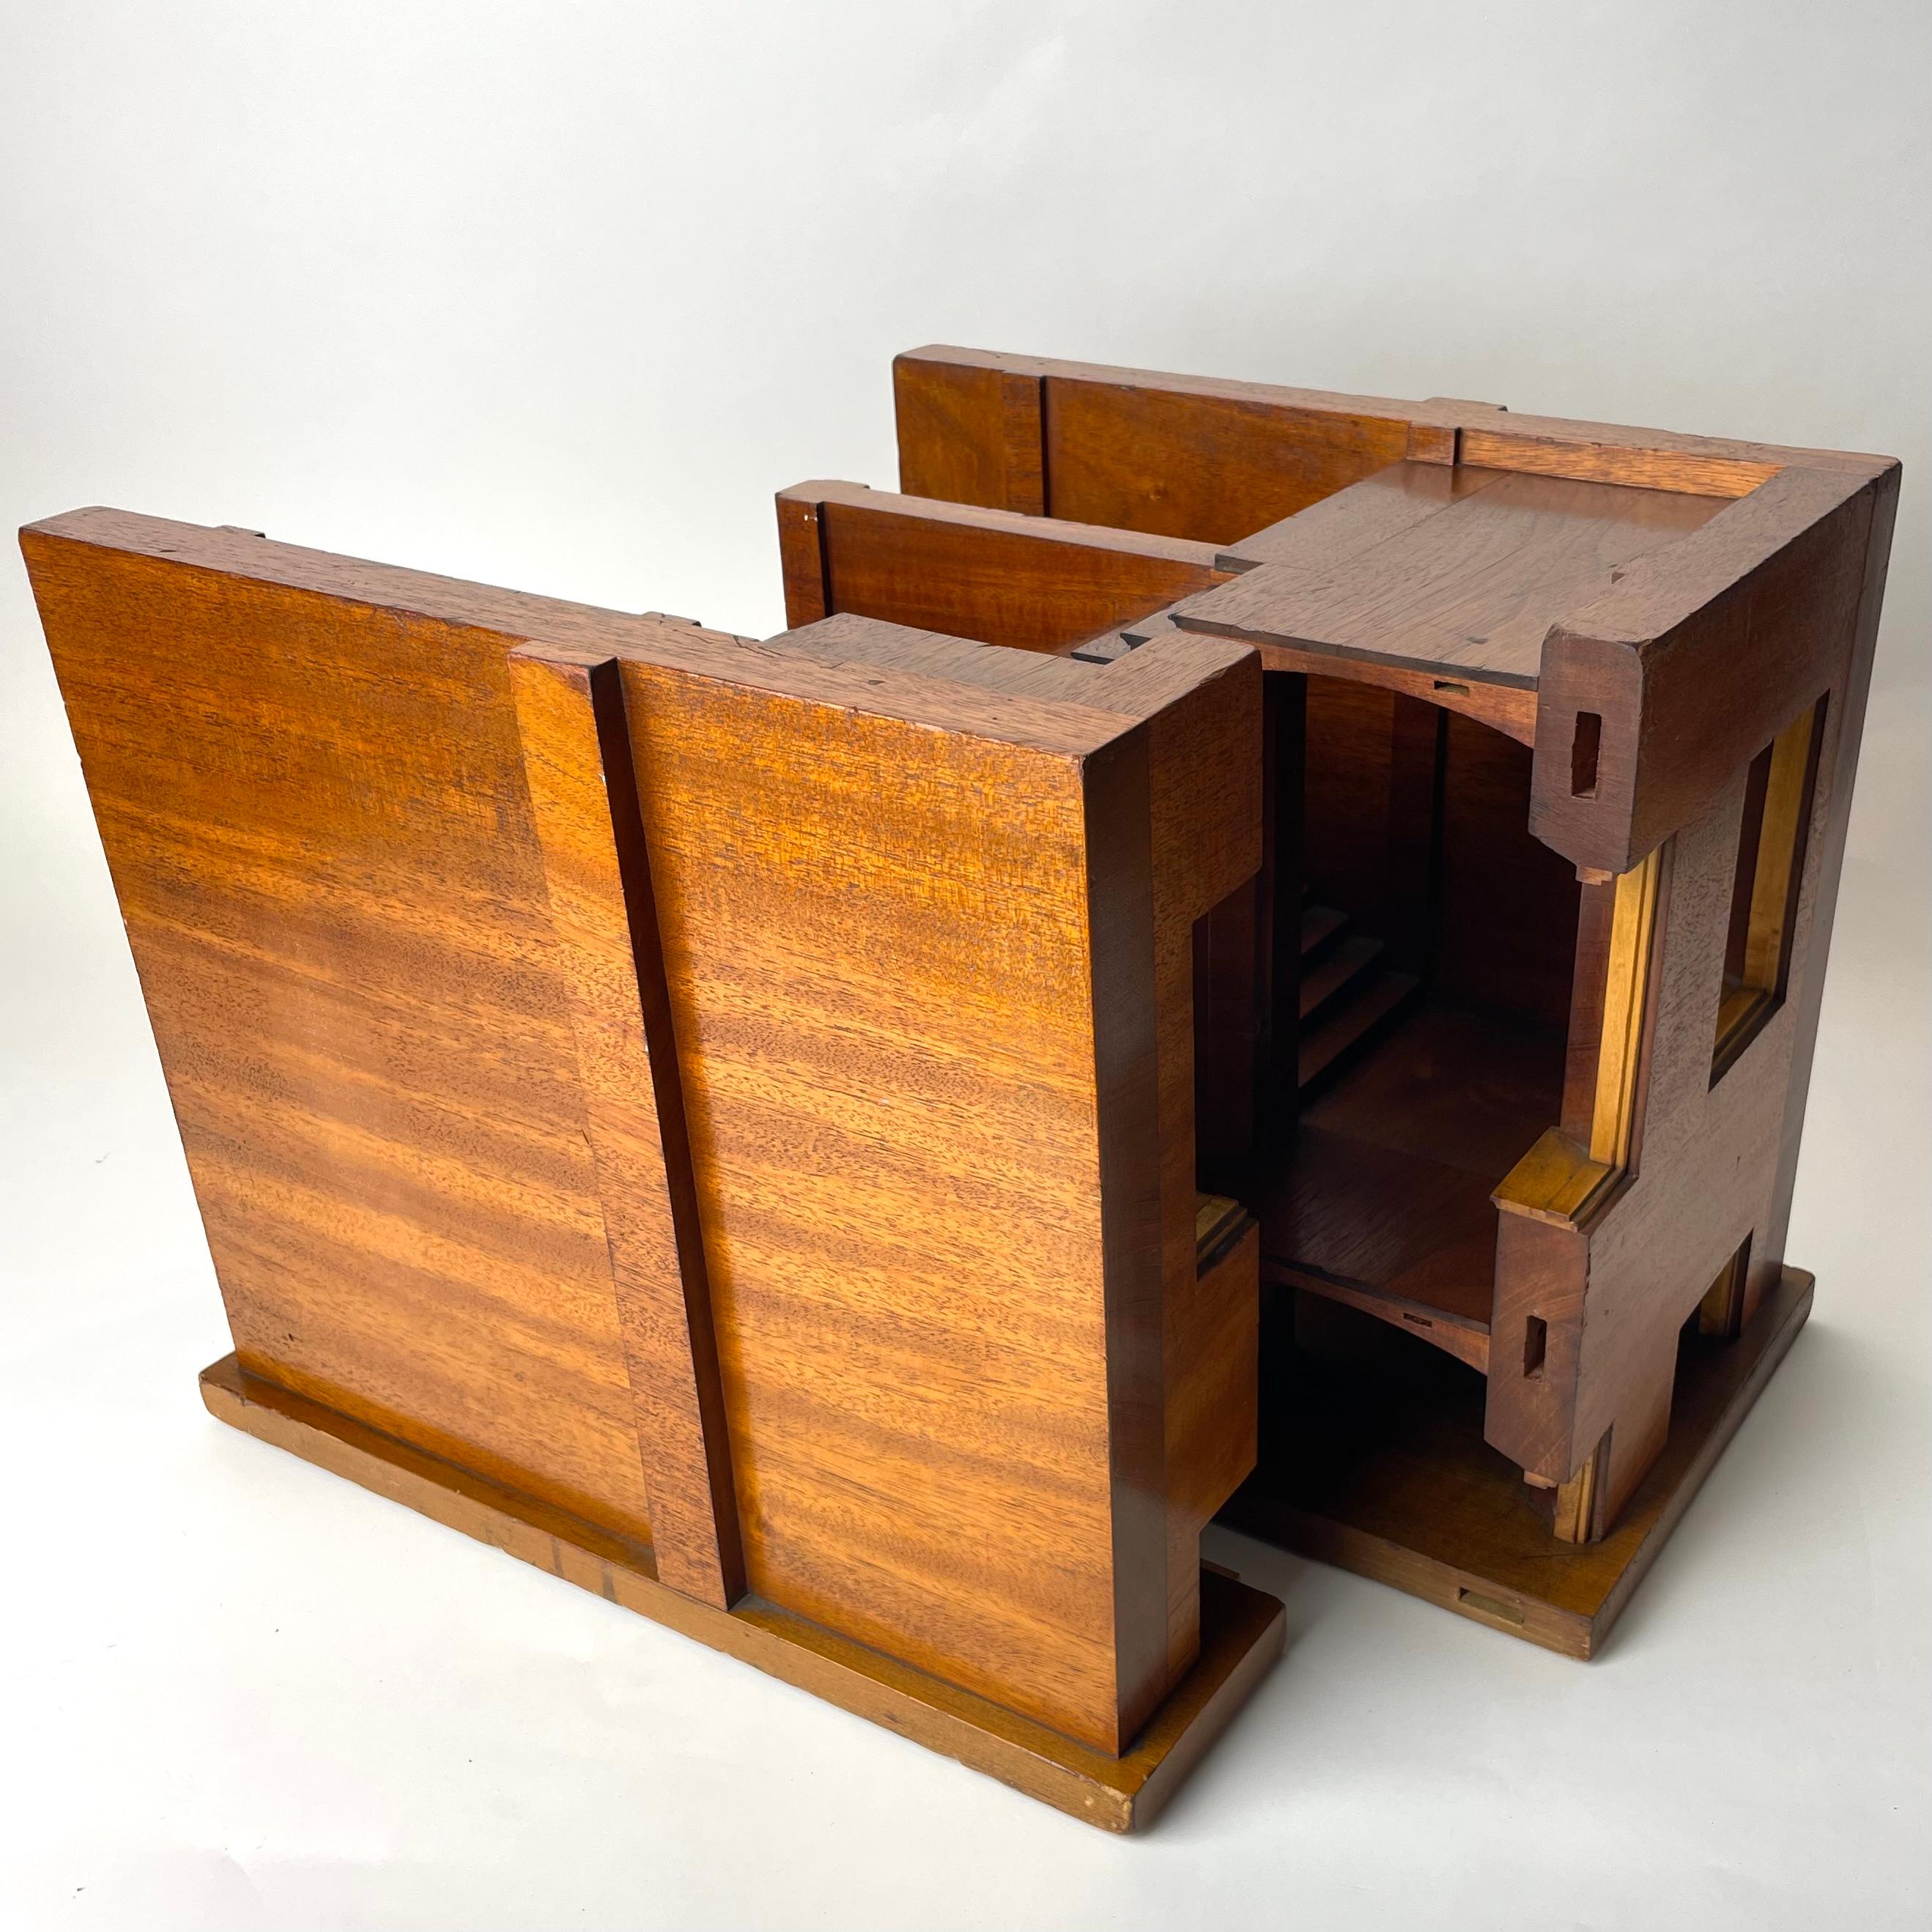 Mahogany Staircase Section Architectural Model, Late 19th/Early 20th C England. For Sale 7